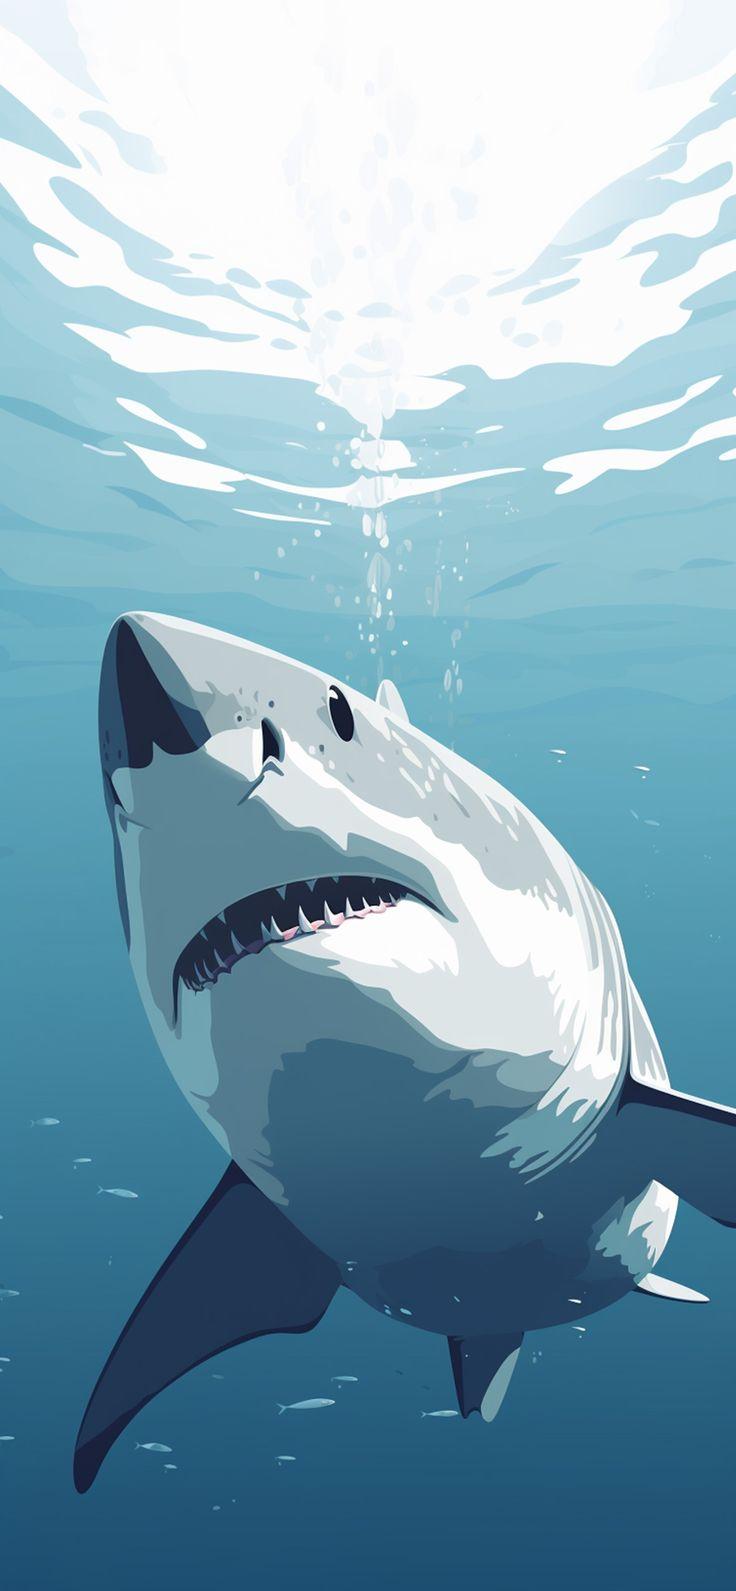 White Shark Blue Wallpaper Cool For iPhone In